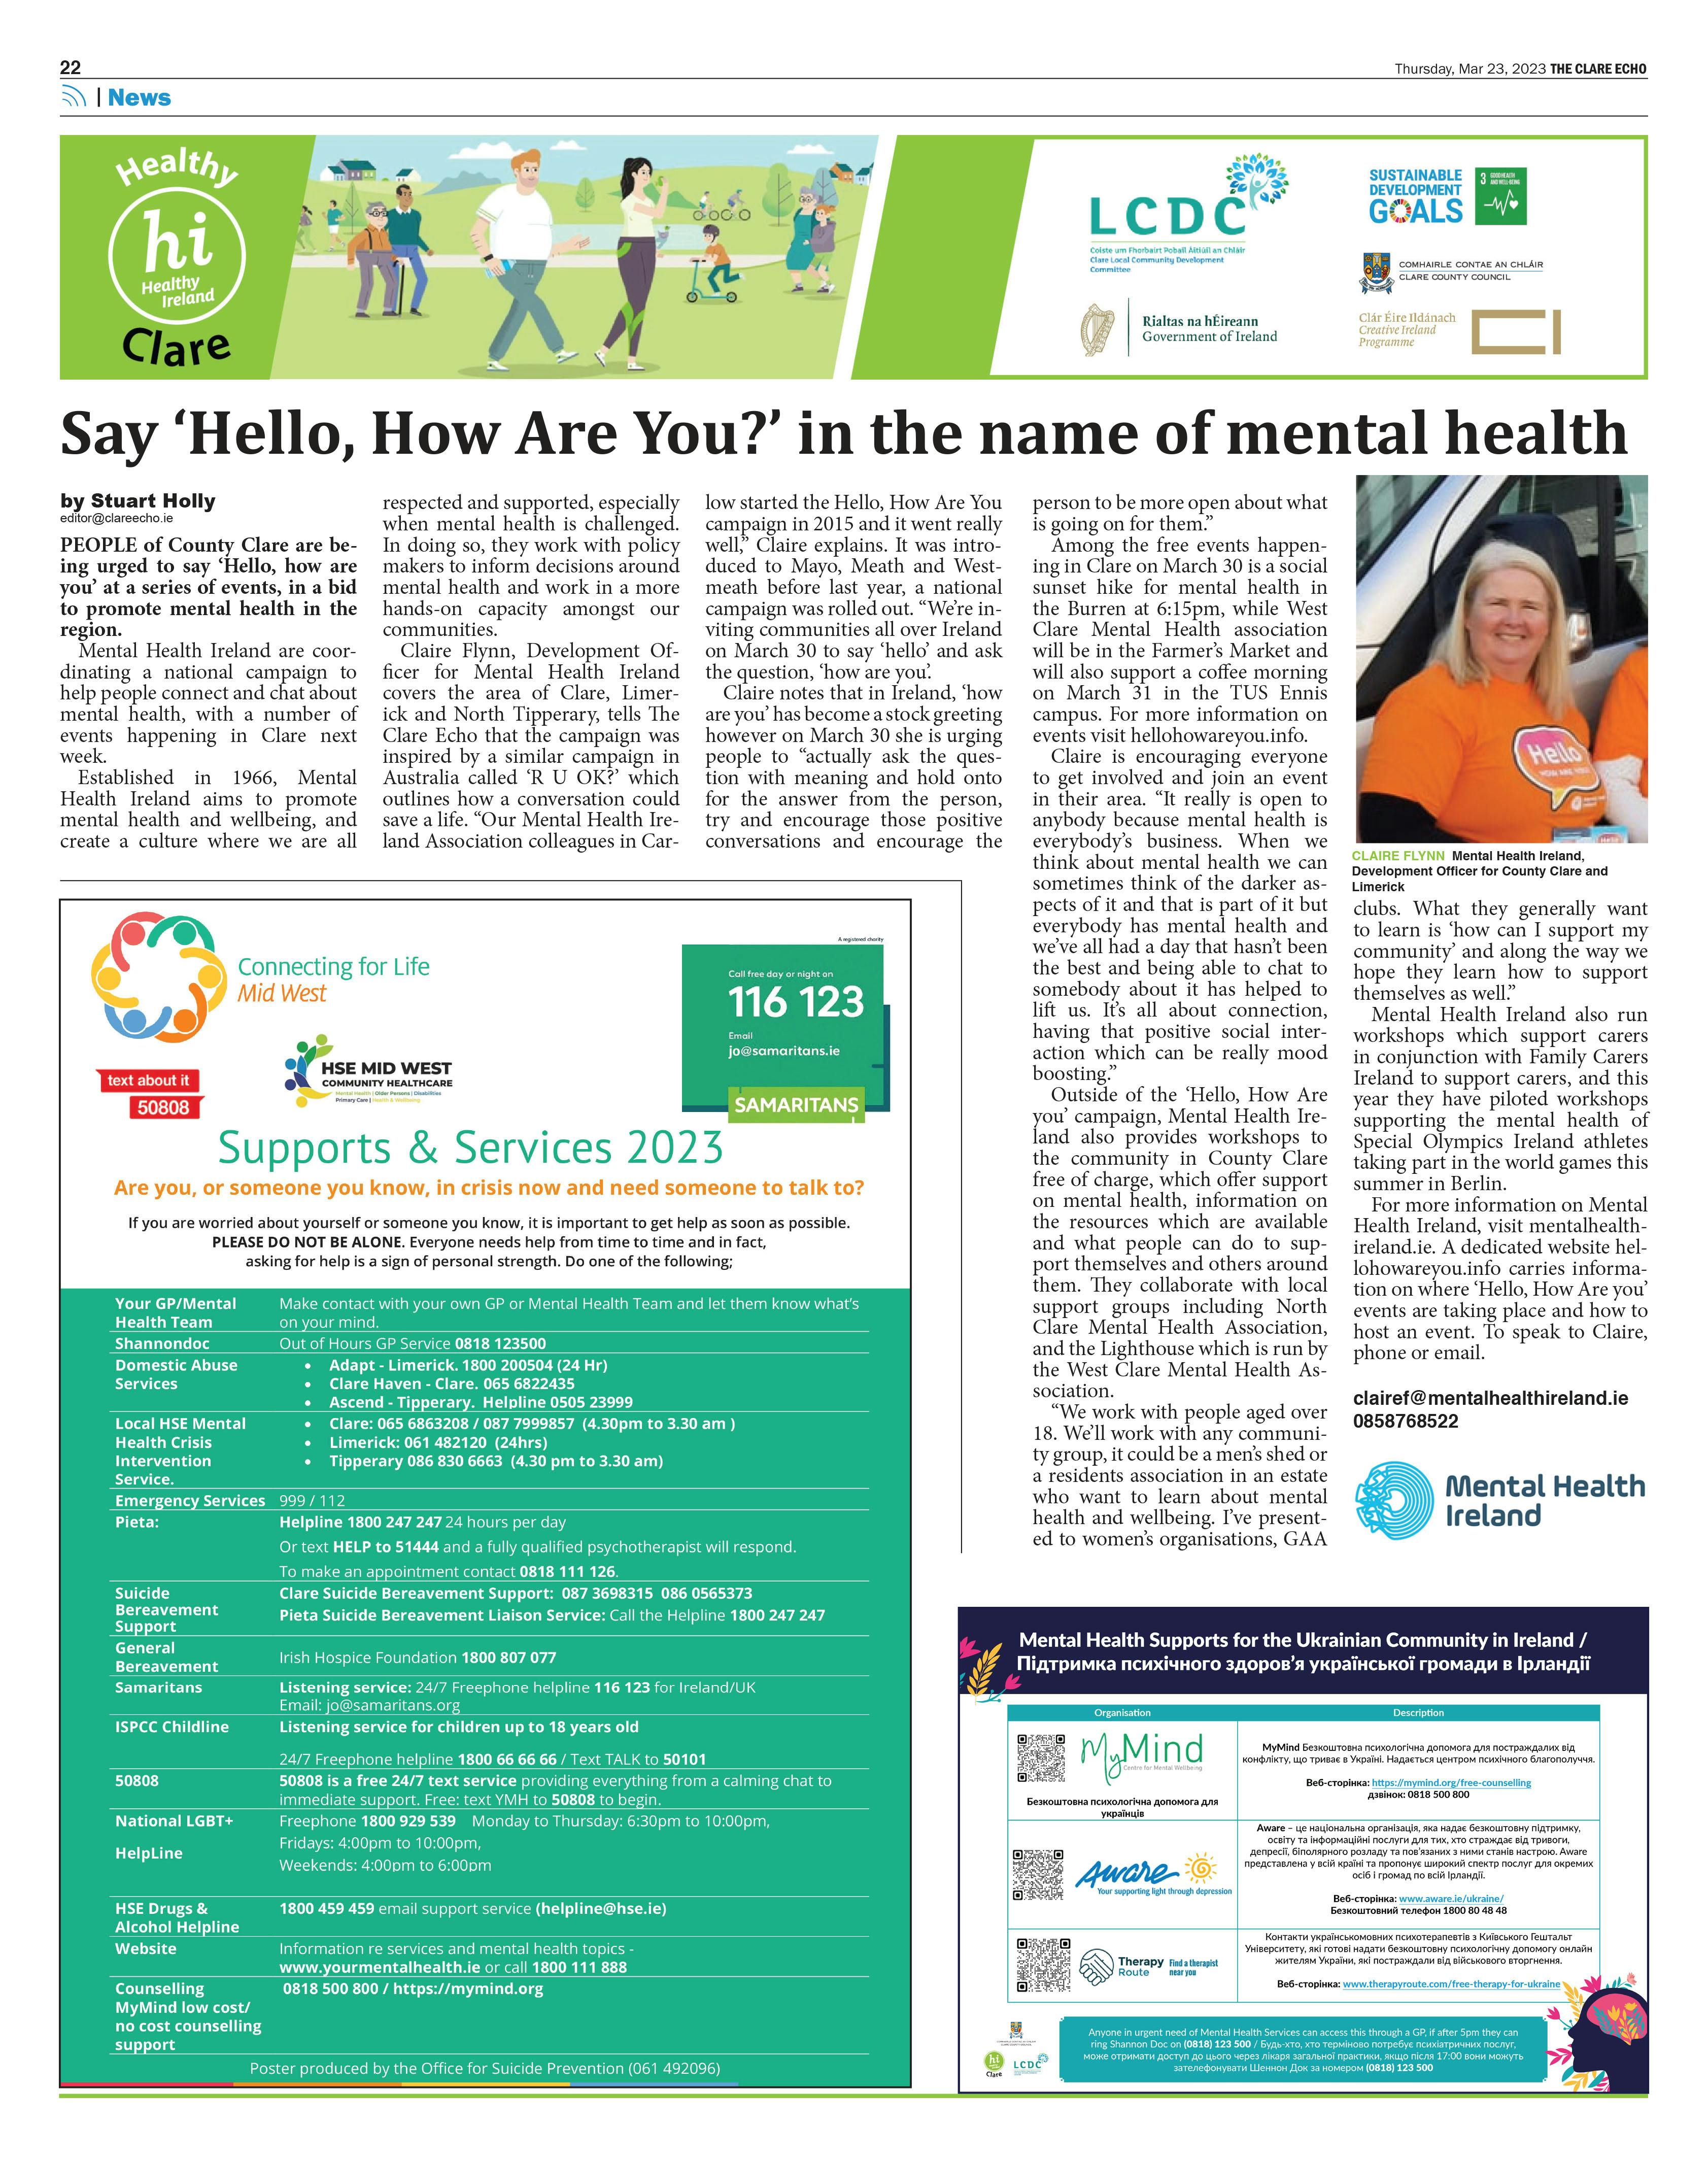 Mental Health Ireland and Mental Health Supports